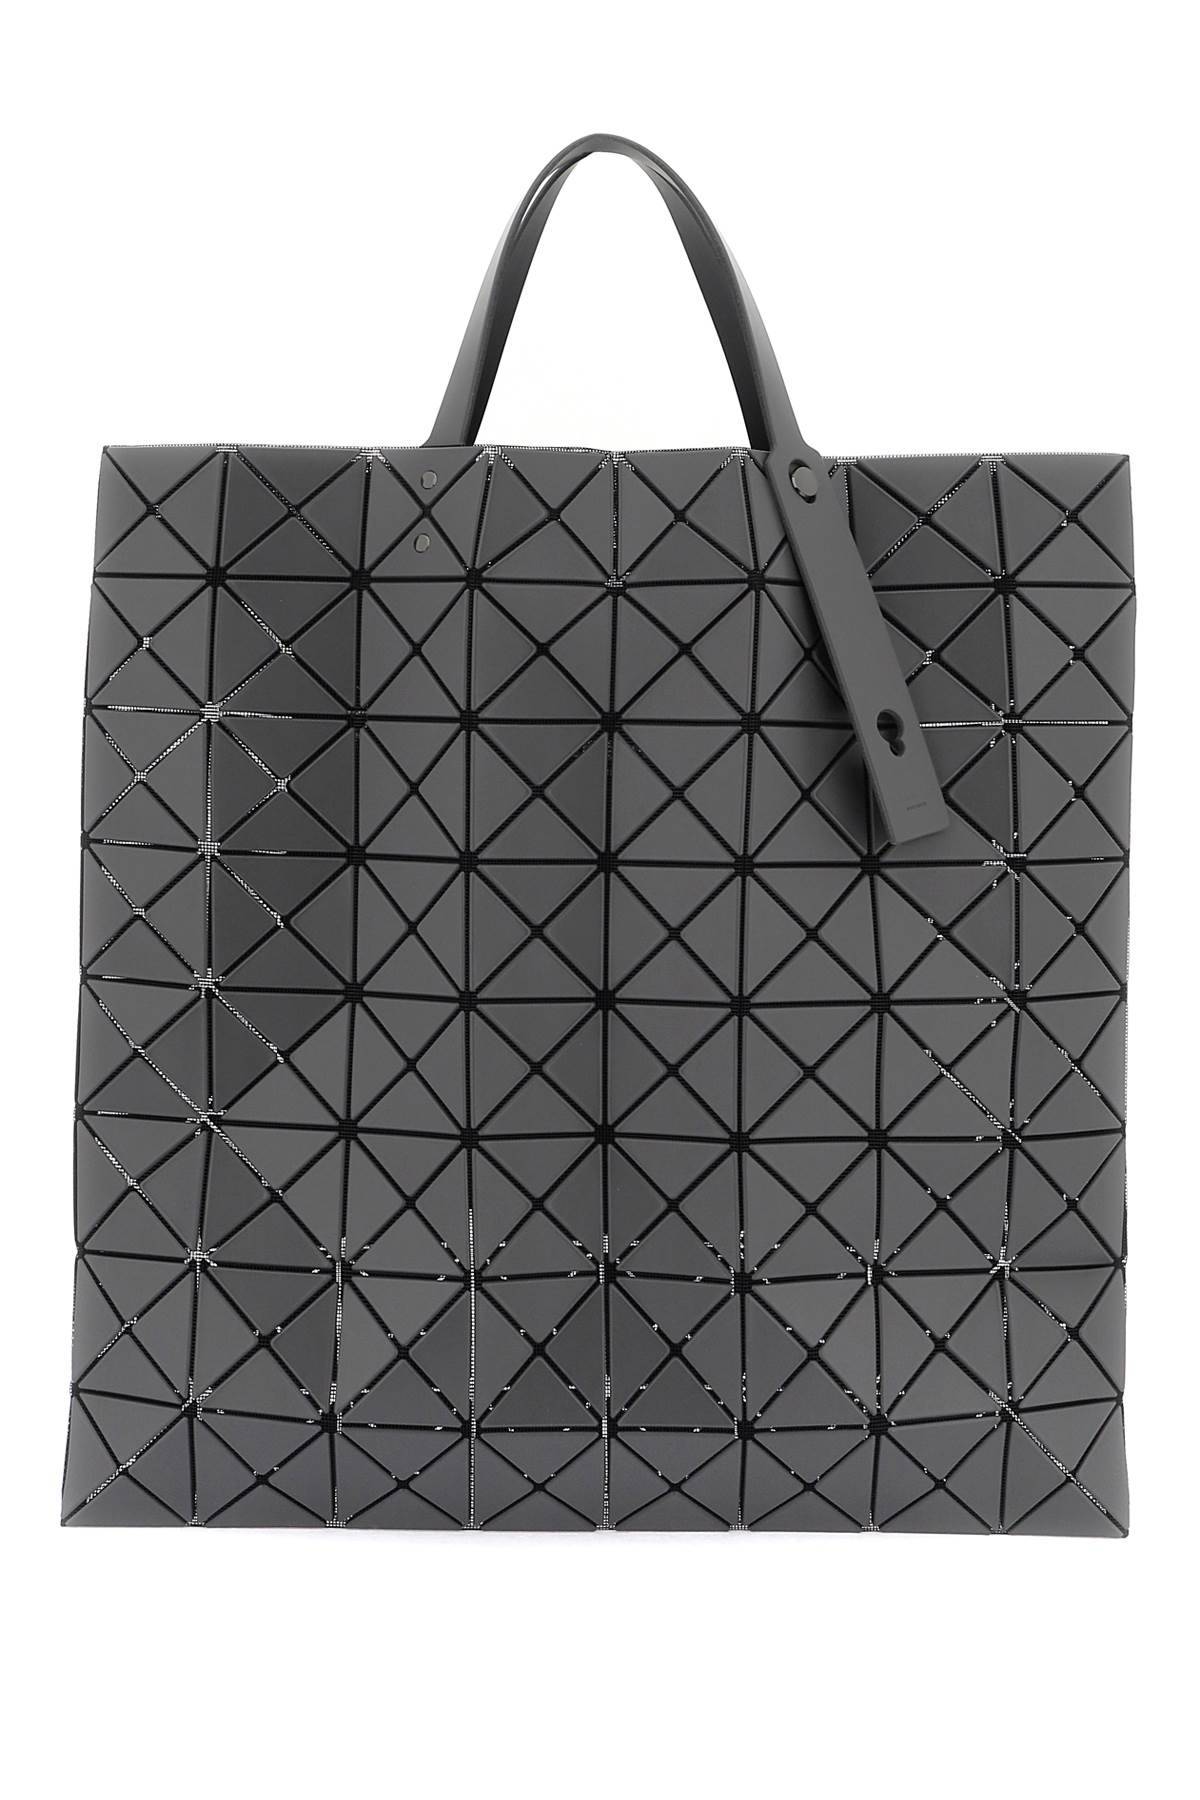 BAO BAO ISSEY MIYAKE BAO BAO ISSEY MIYAKE matte lucent tote